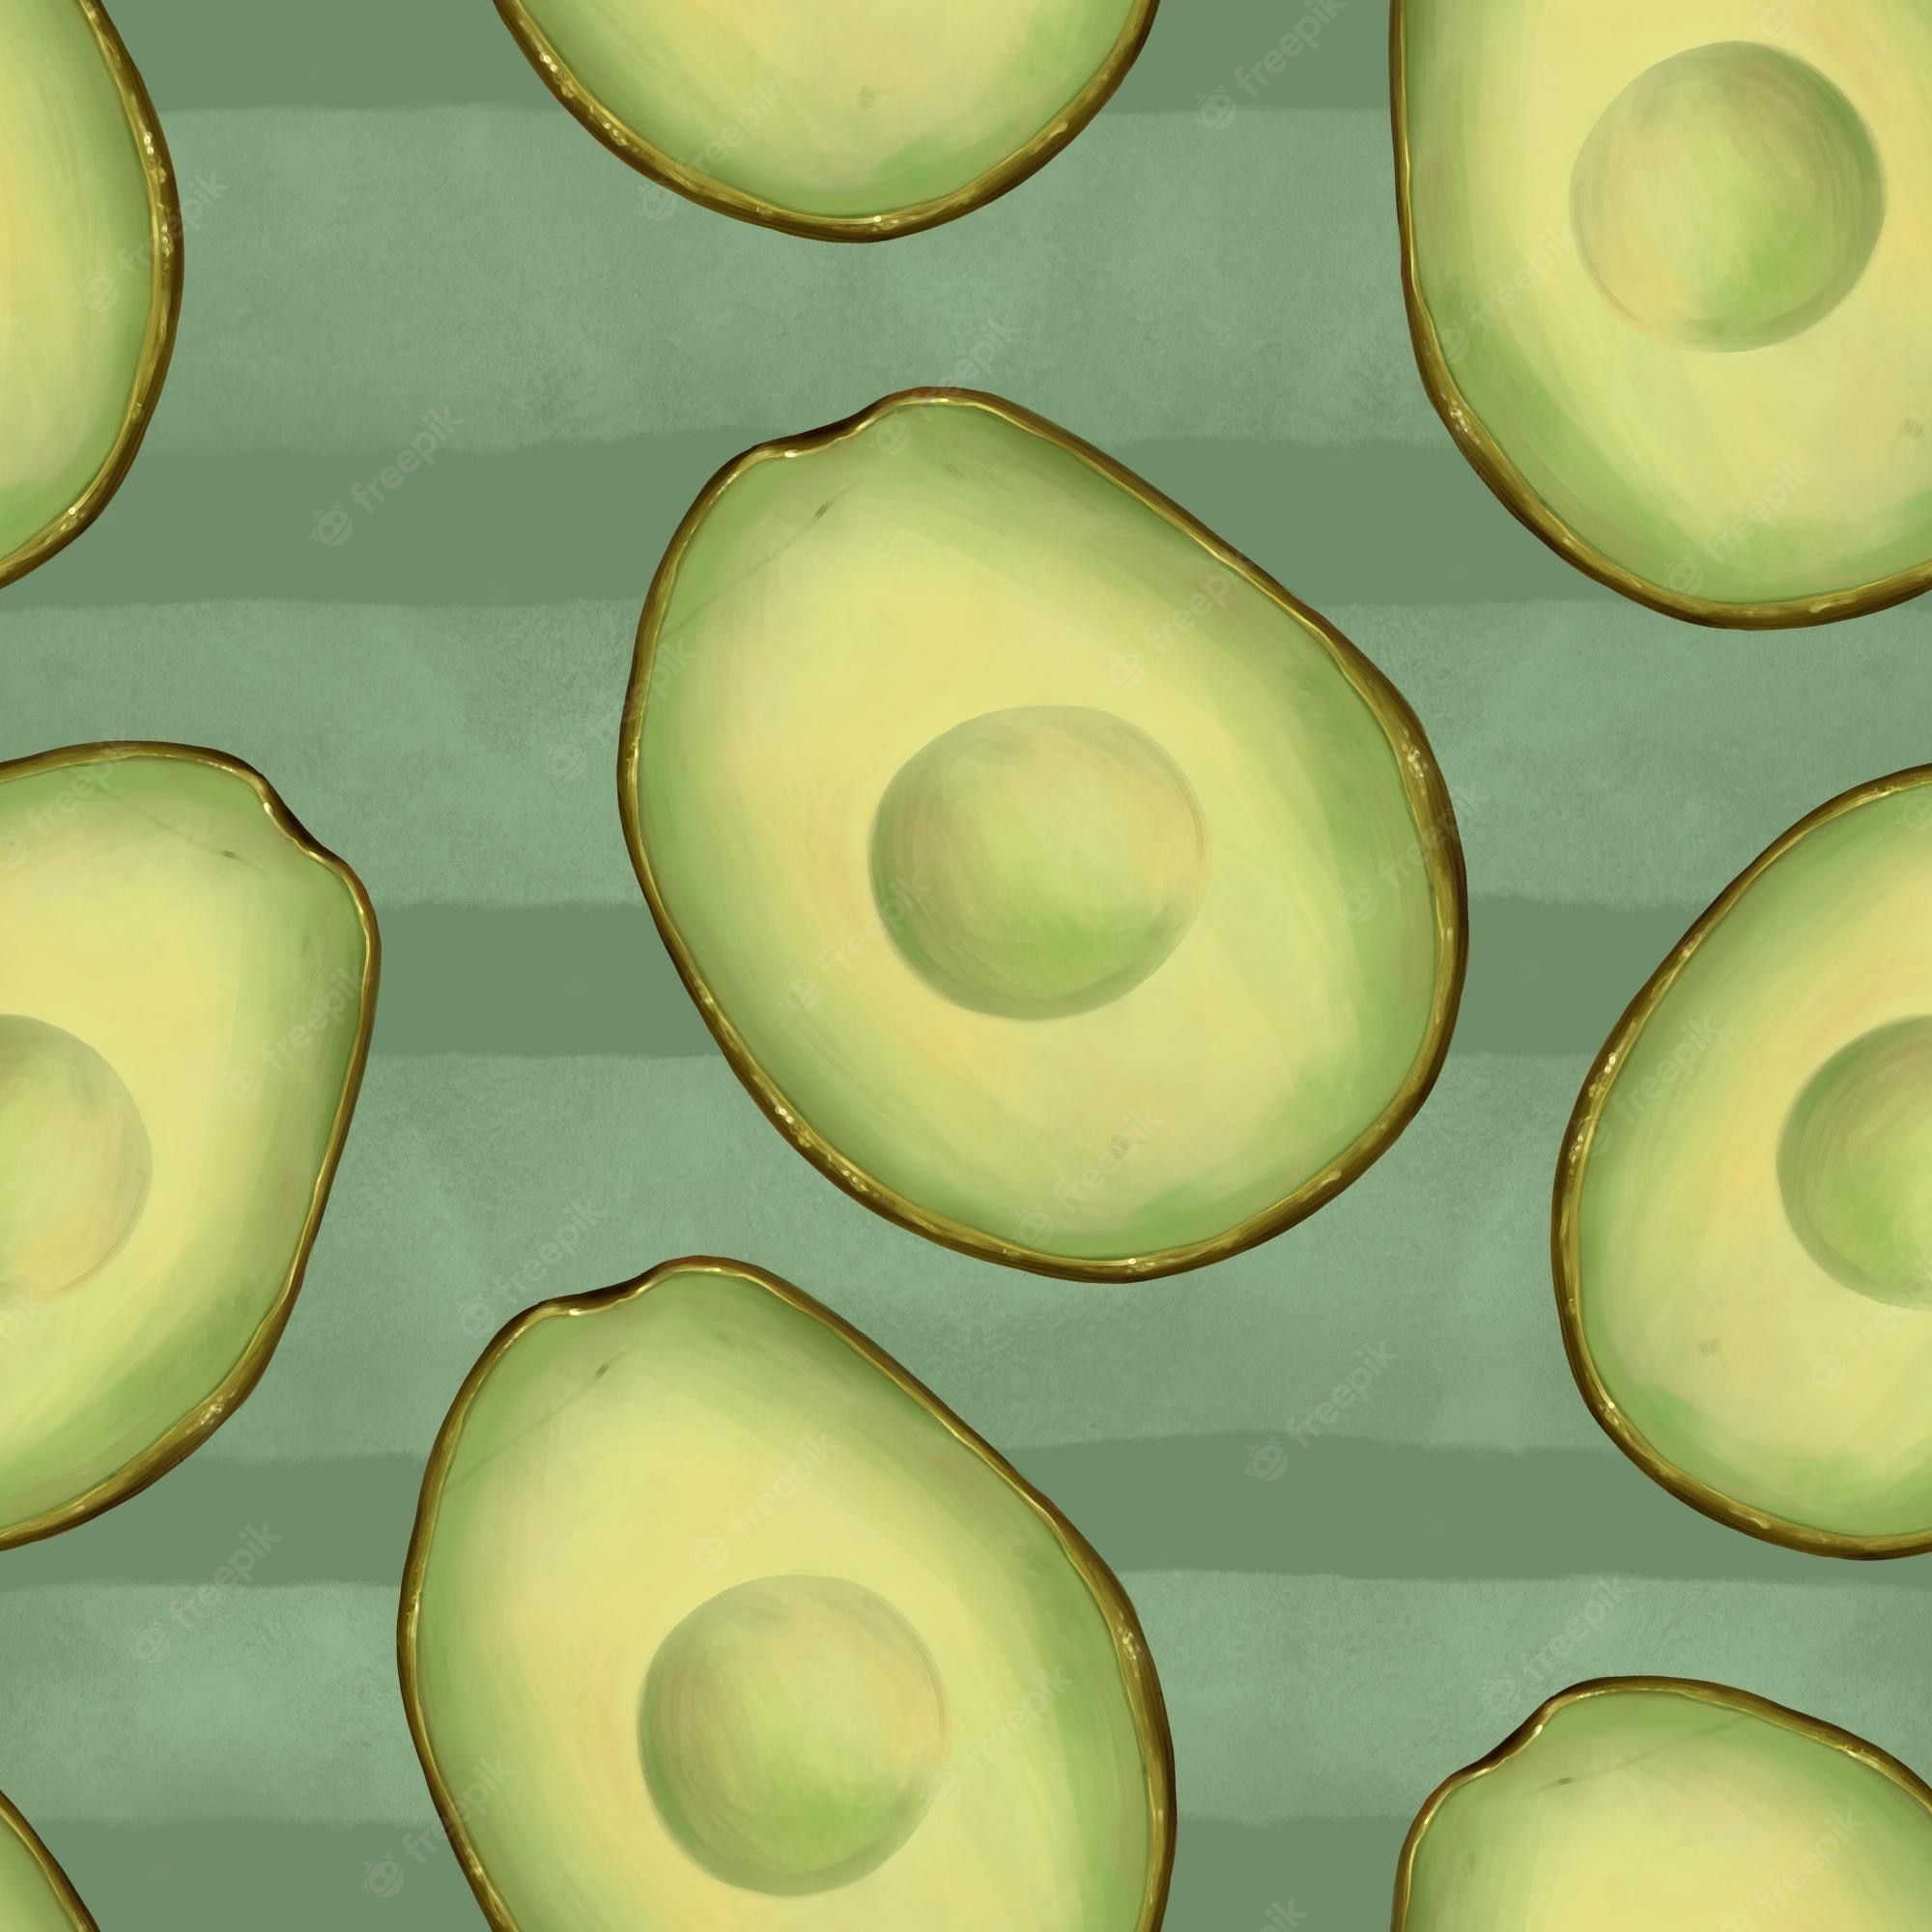 A watercolor painting of avocados on a green striped background - Avocado